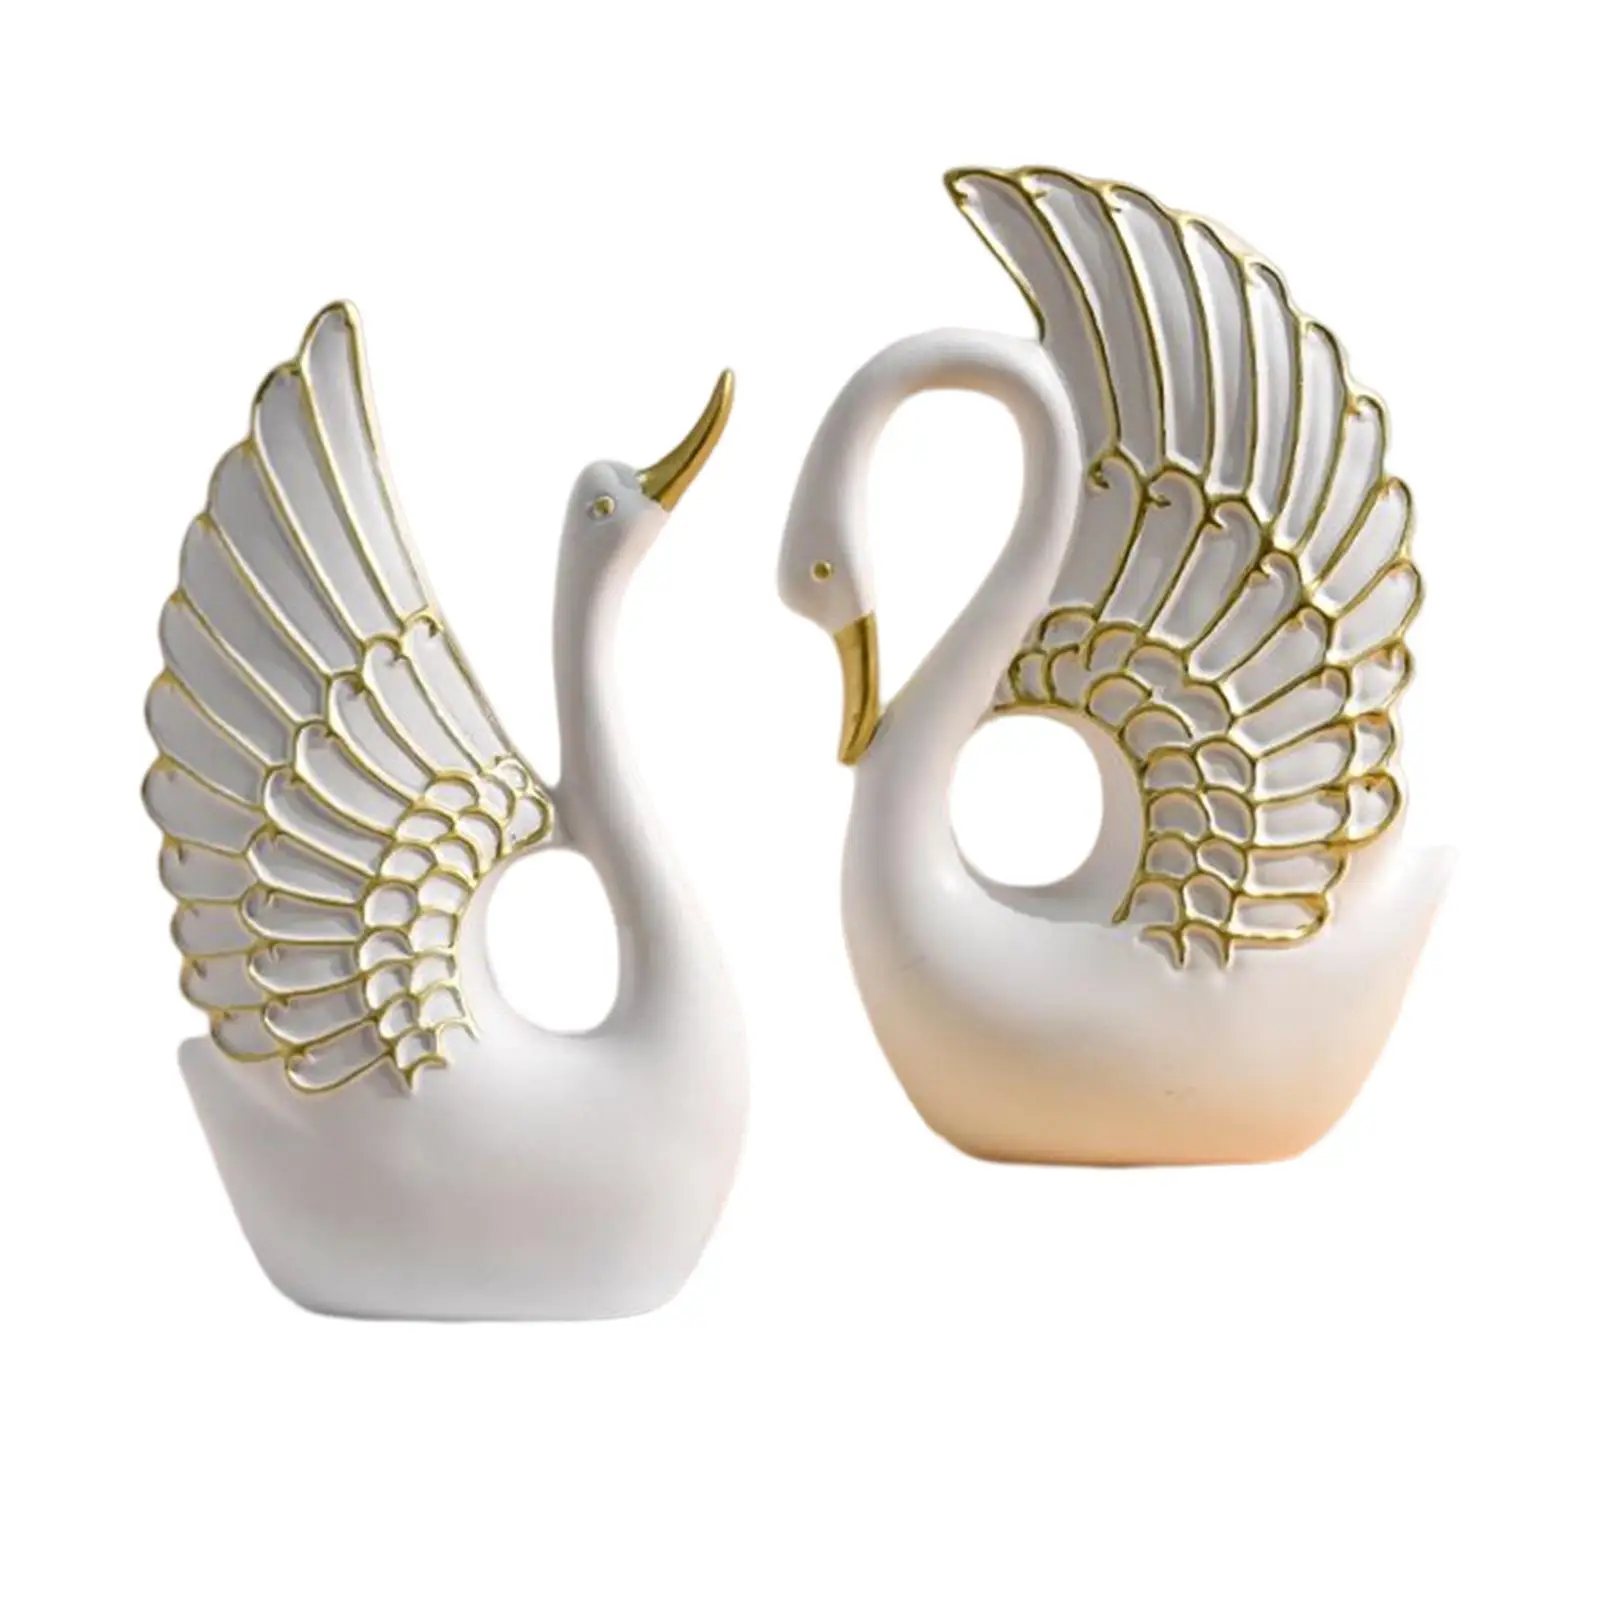 

2x Swan Figurines Statues Birthday Birthday Gift Cake Topper Resin Sculpture